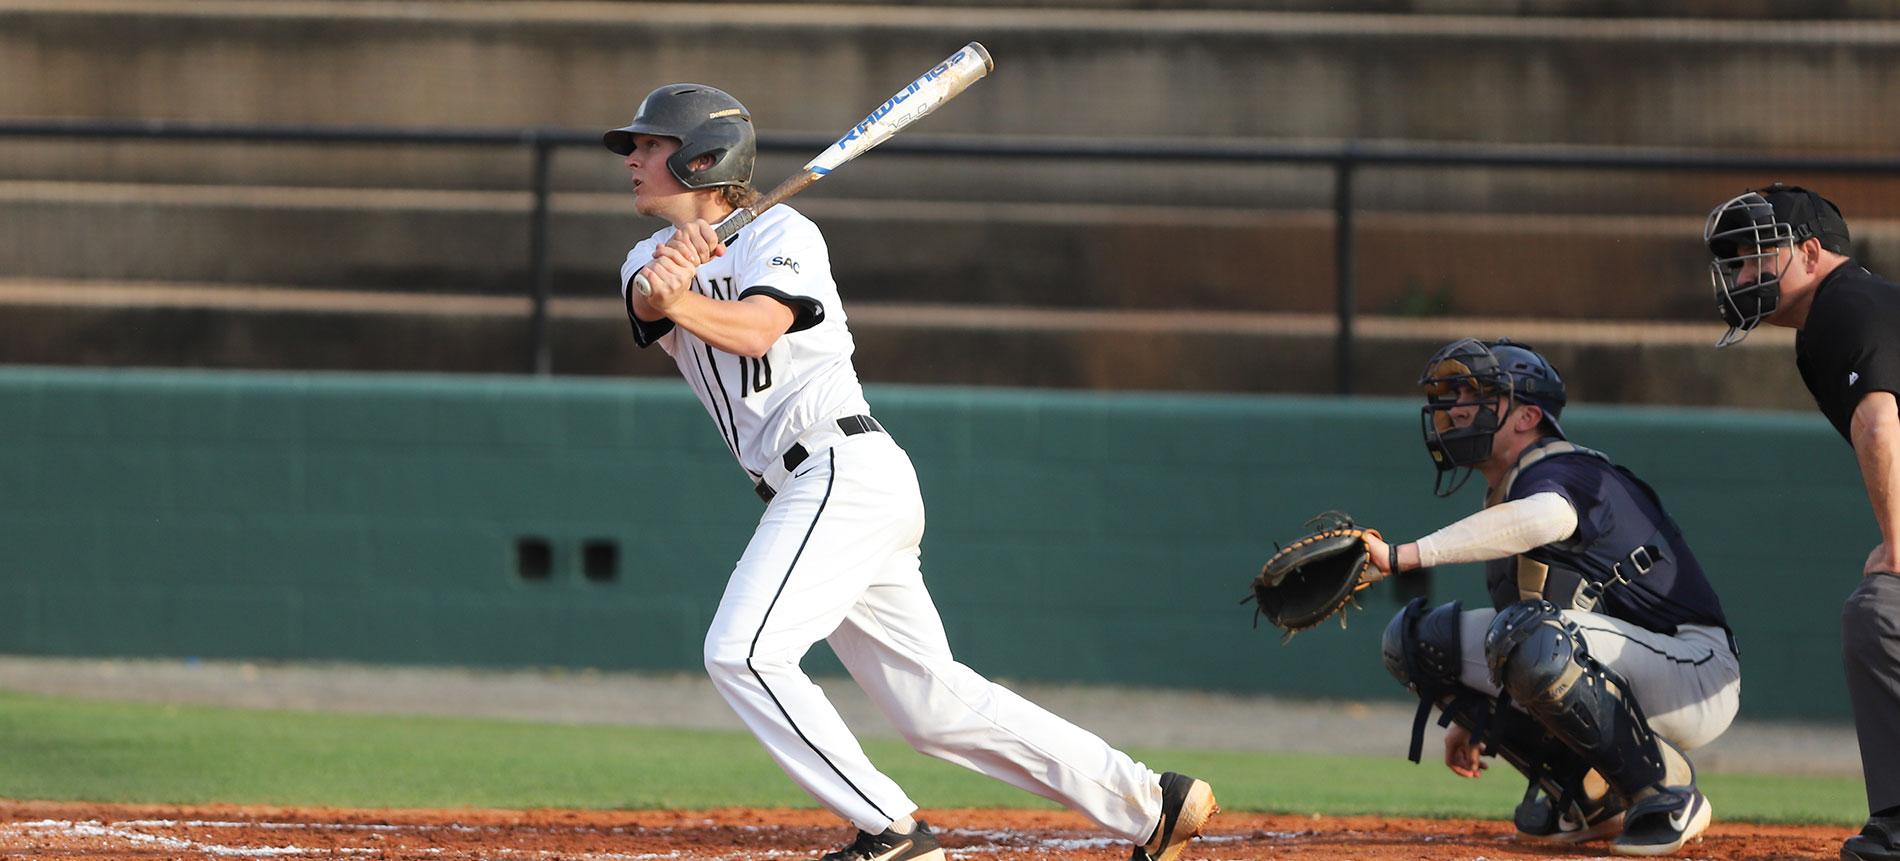 Trojans Split Crucial South Atlantic Conference Doubleheader with Coker